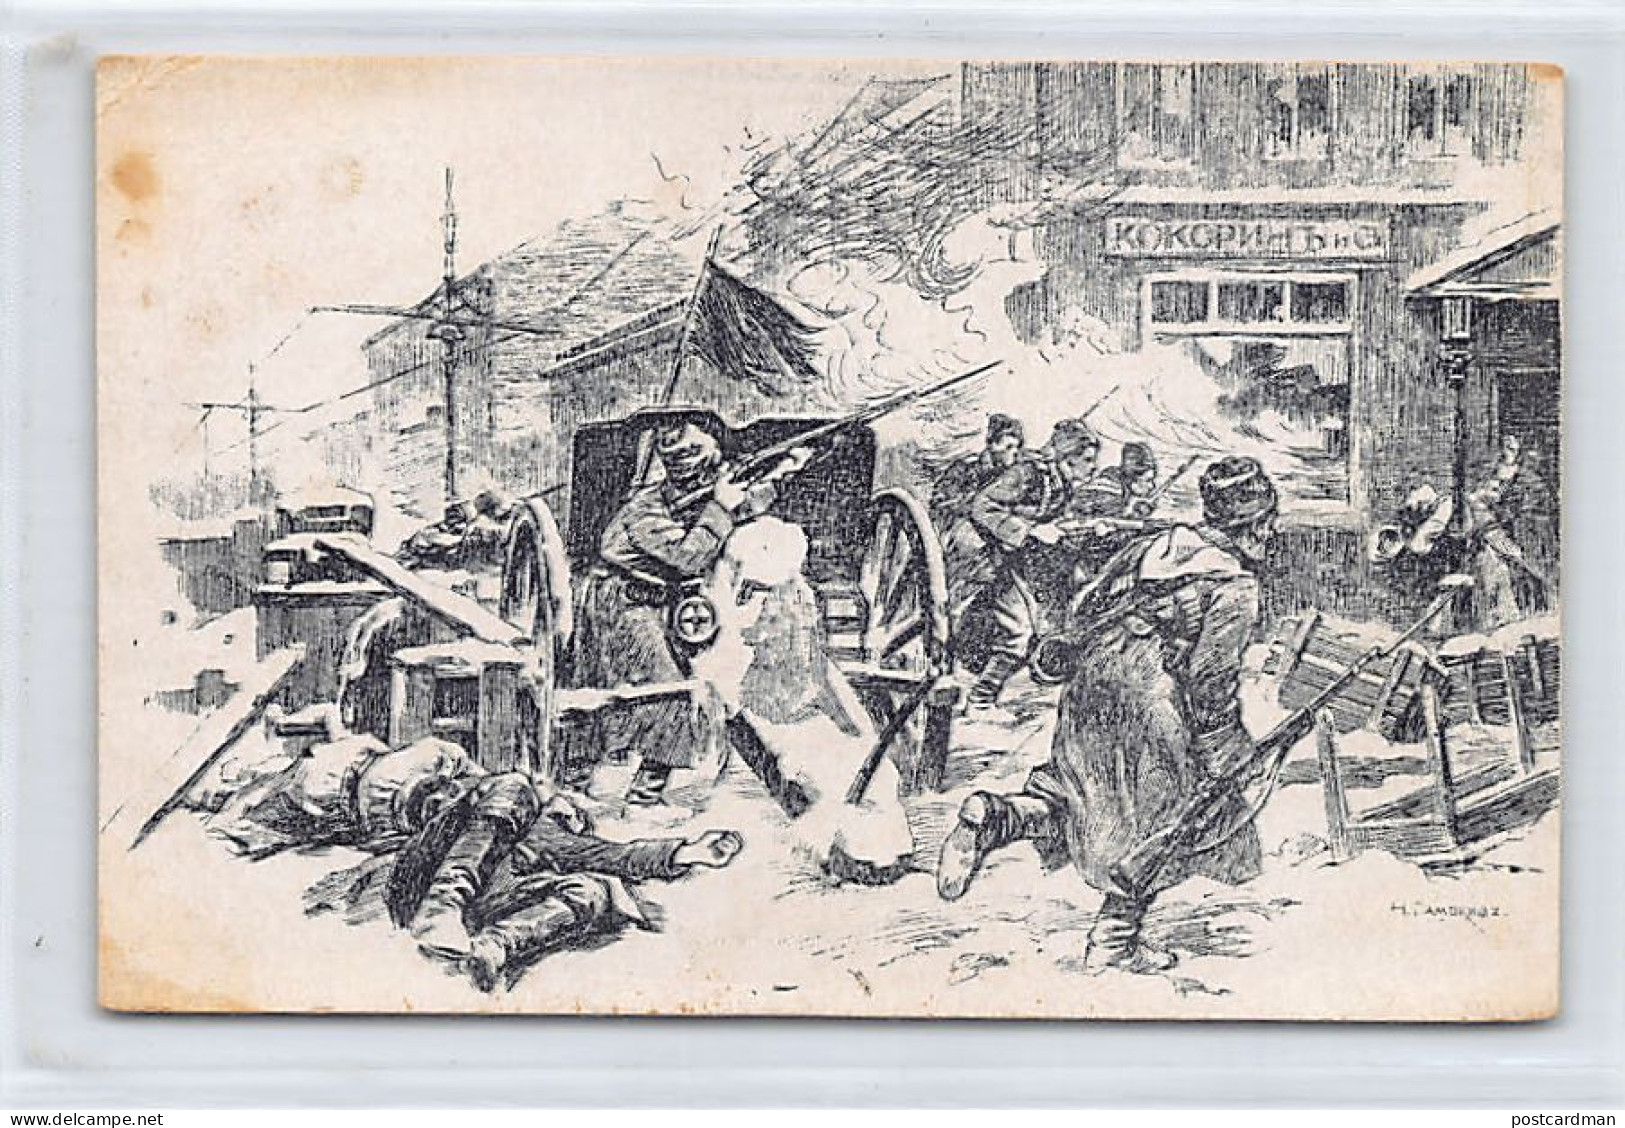 Russia - World War One - Battle Scene - Publ. Skobelev Committee For The Care Of The Wounded Soldiers  - Russia